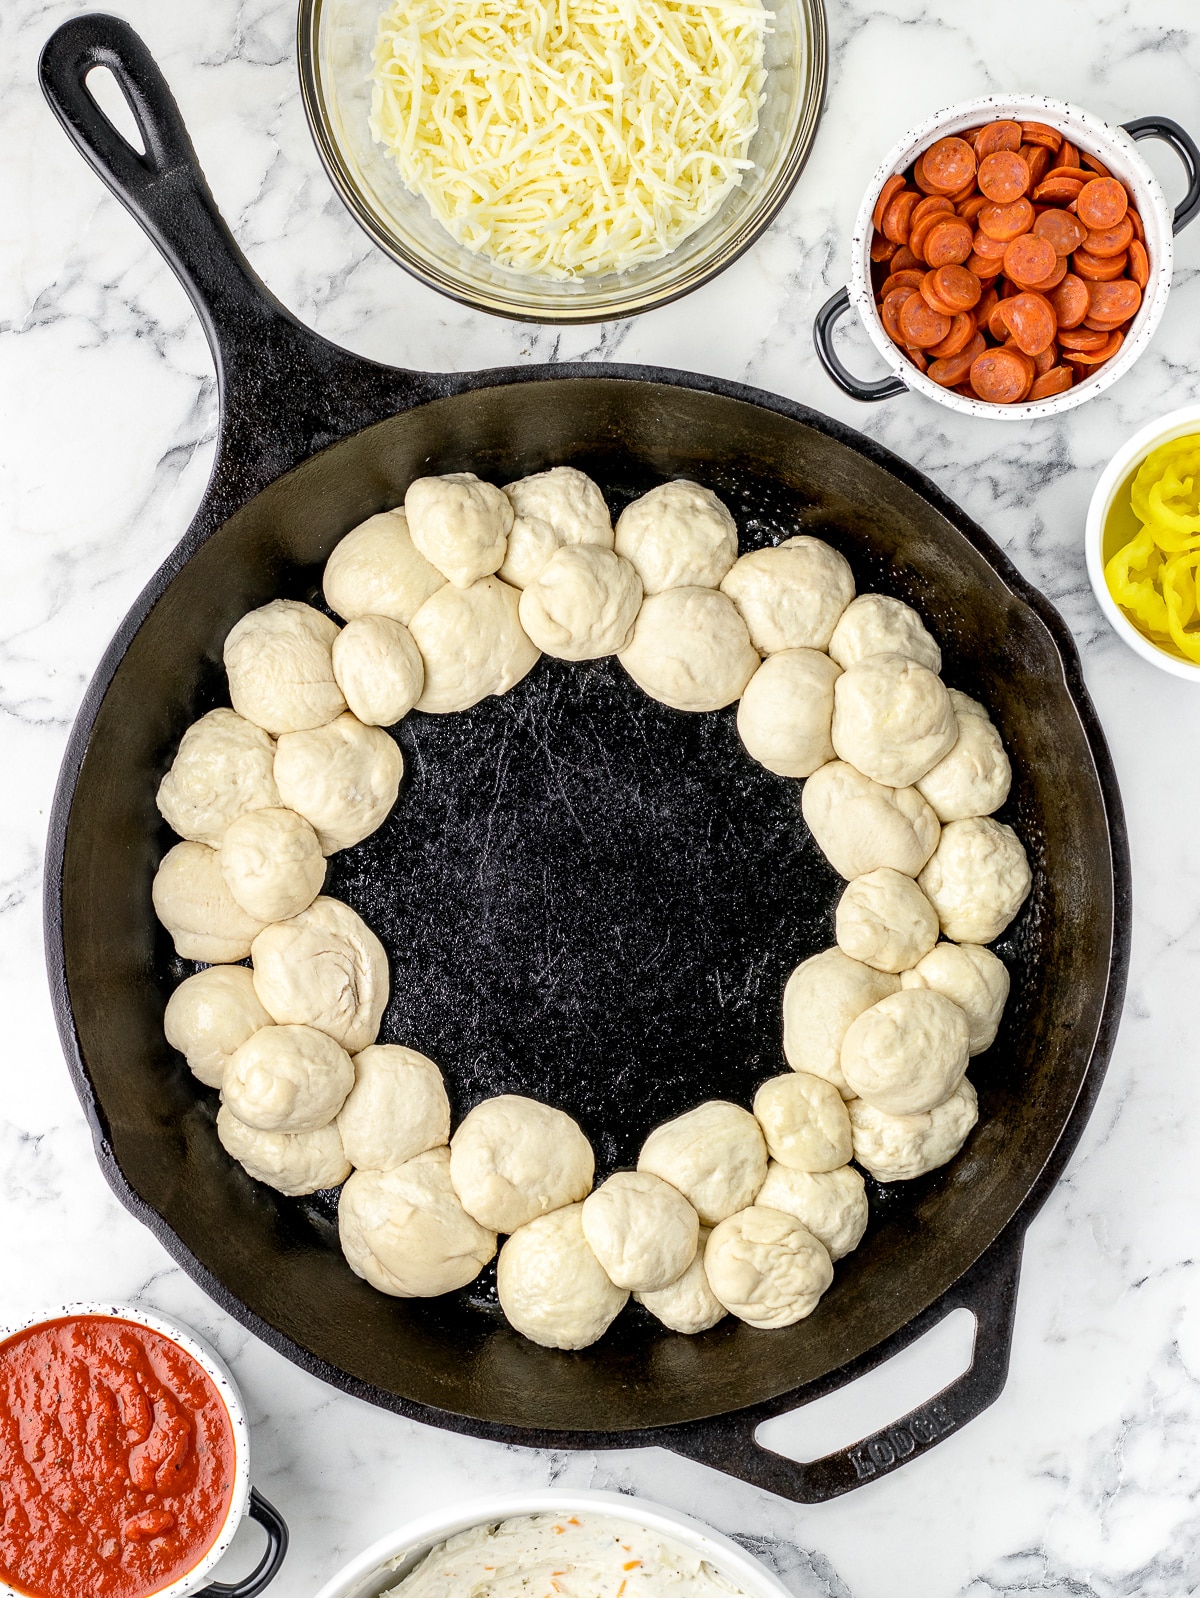 Rolled pizza dough balls lined around the perimeter of a greased cast iron skillet.